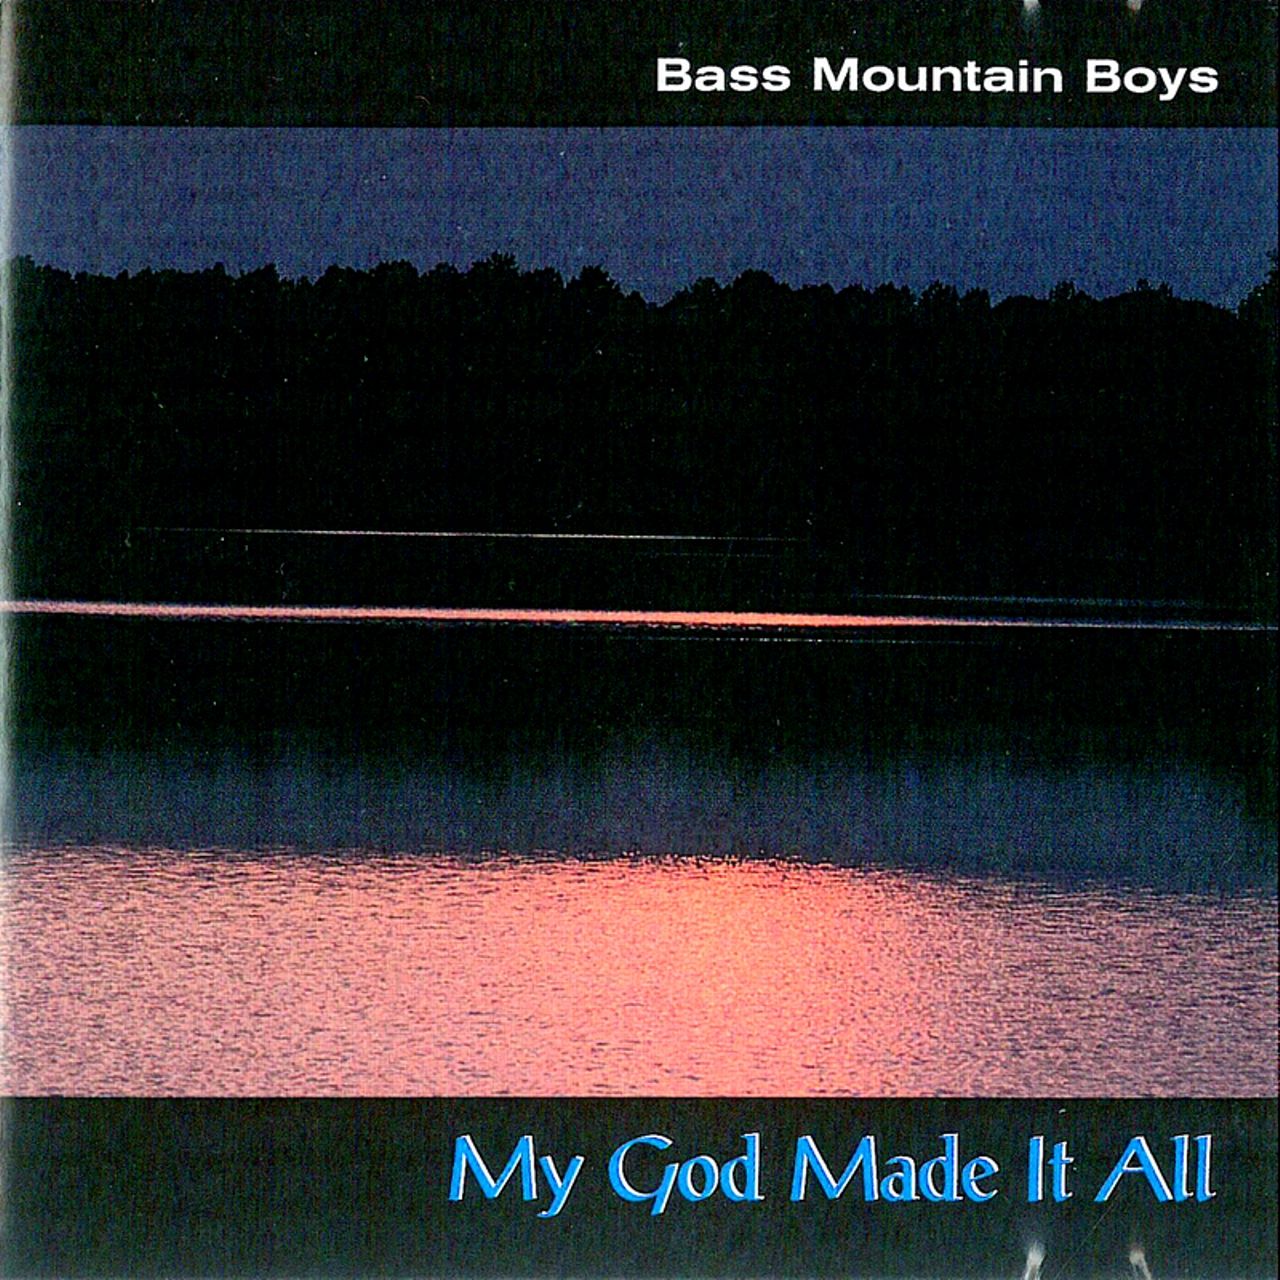 Bass Mountain Boys - My God Made It All cover album